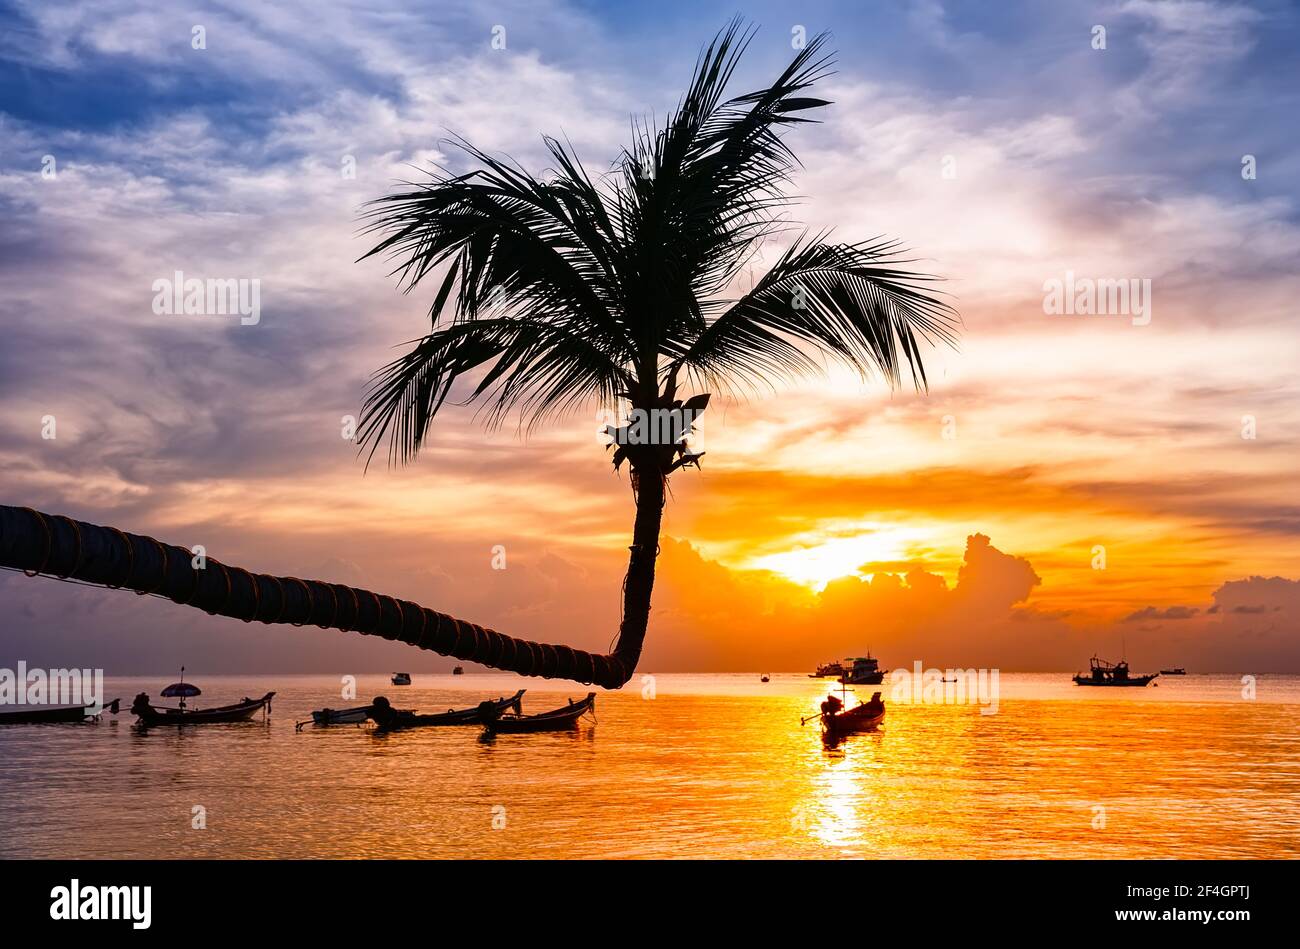 Palm tree silhouette on sunset tropical beach. Coconut palm tree against colorful sunset on the beach in Phuket, Thailand. Stock Photo